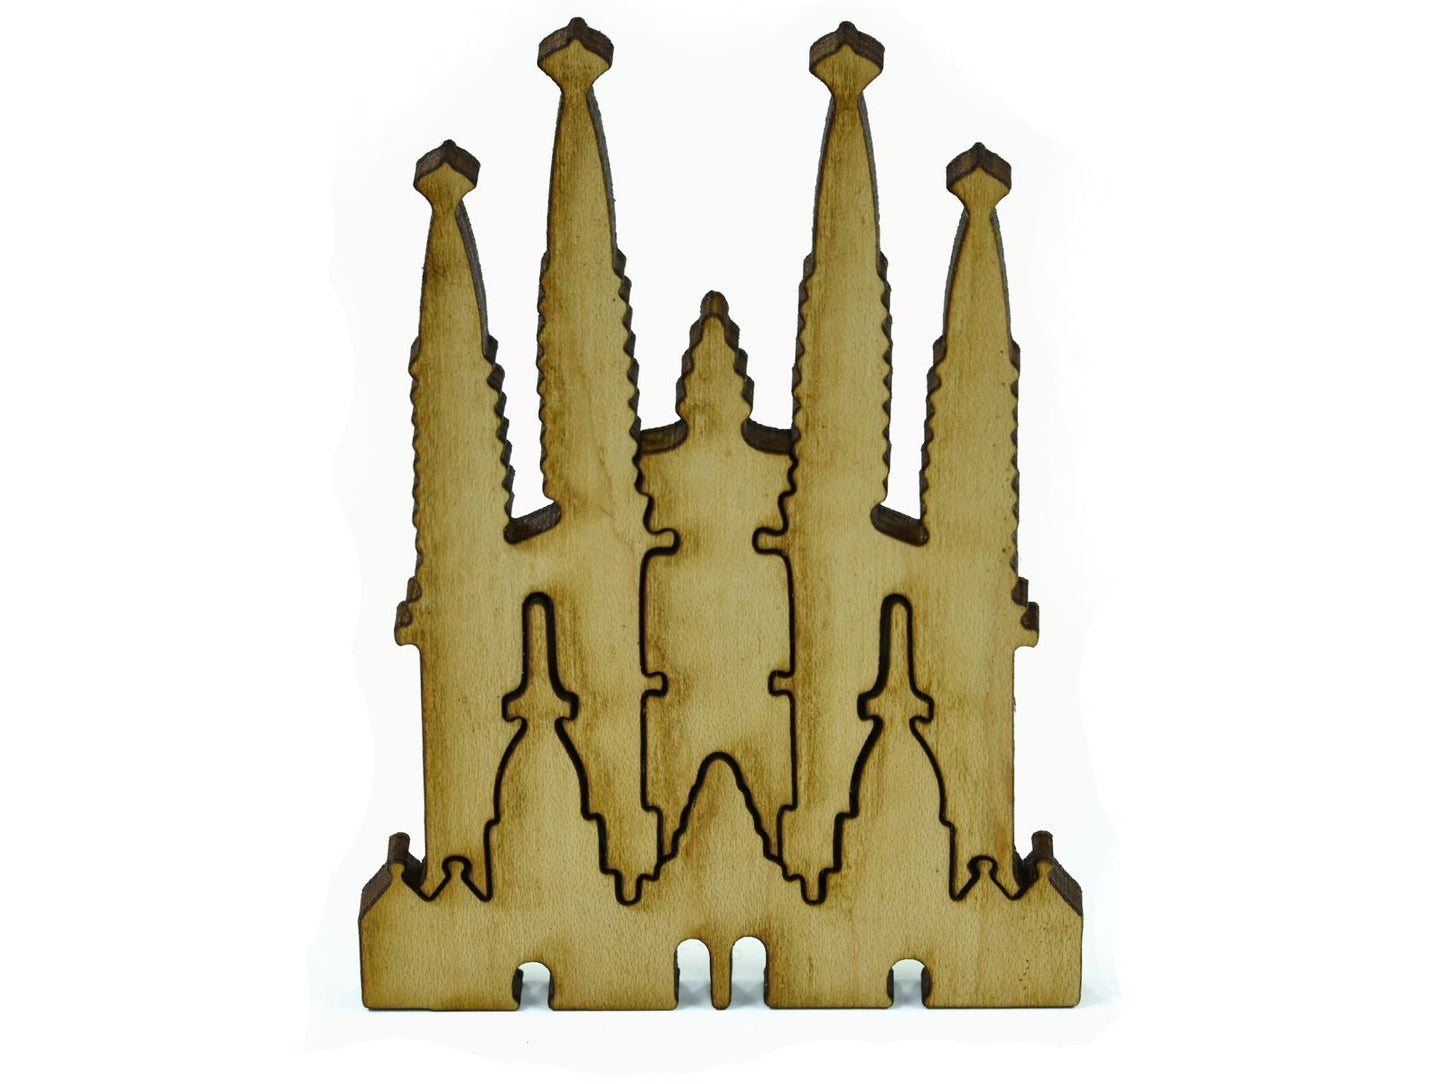 A closeup of pieces shaped like Gaudi's Cathedral in Barcelona.